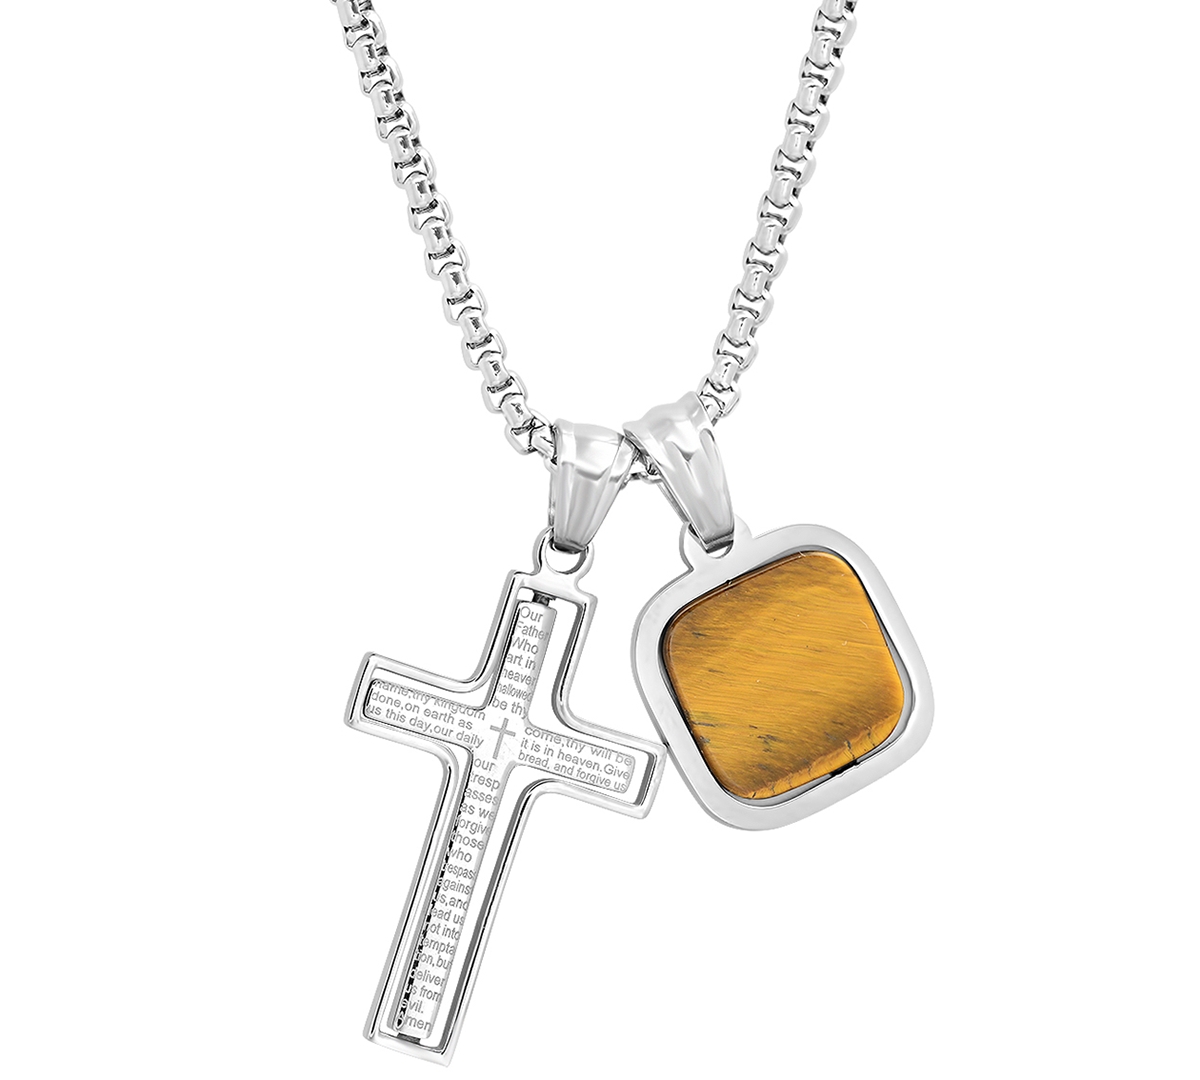 Shop Steeltime Men's Silver-tone Our Father English Prayer Spinning Cross & Square Pendant Necklace, 24"